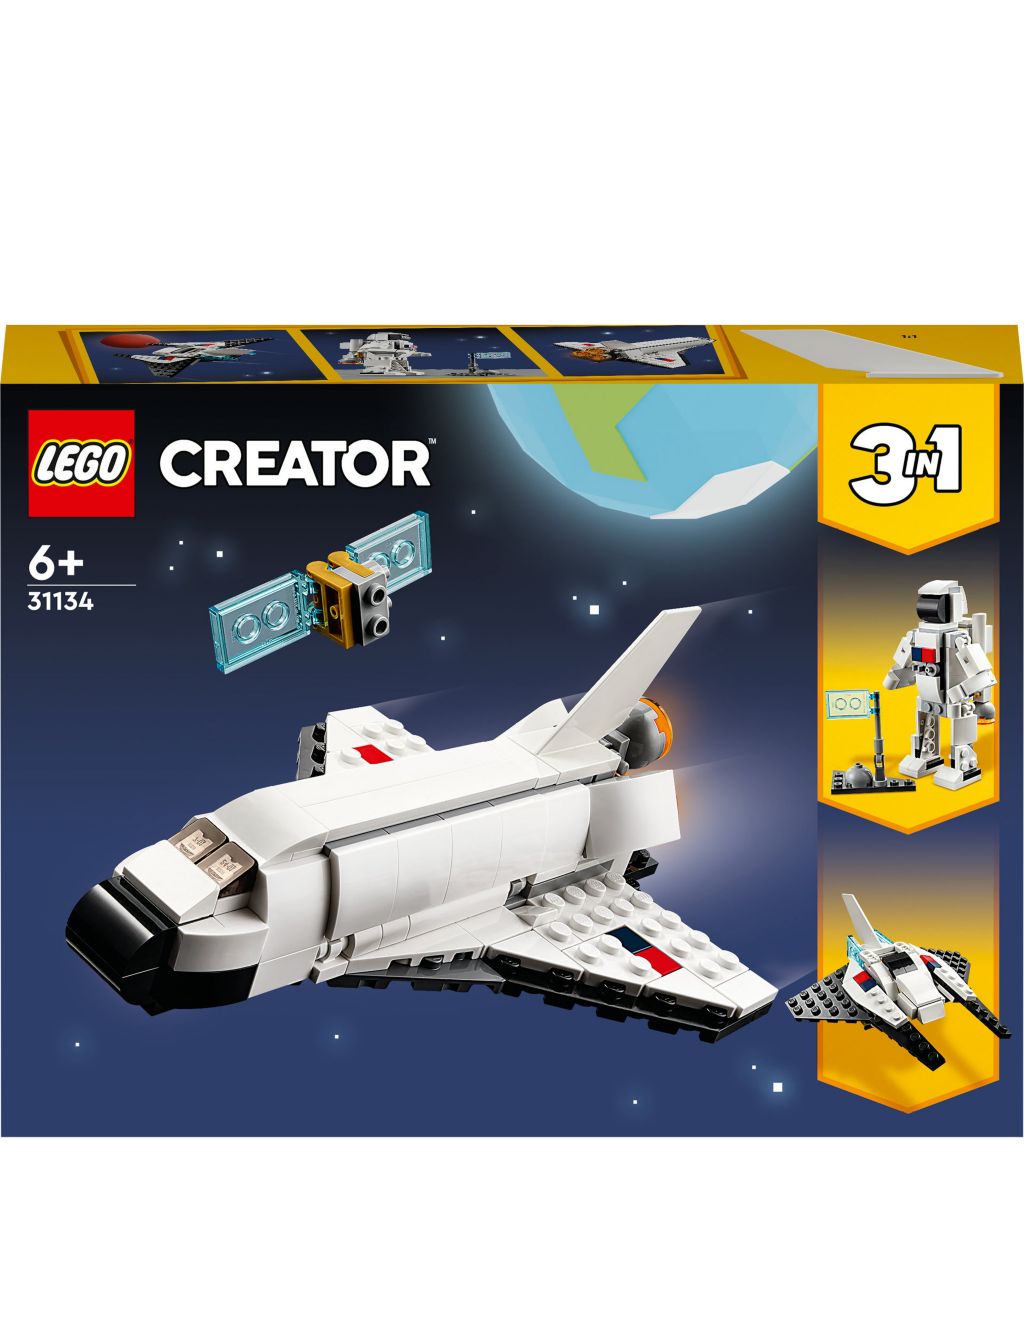 LEGO Creator 3 in 1 Space Shuttle Toy Set (6+ Yrs) image 3